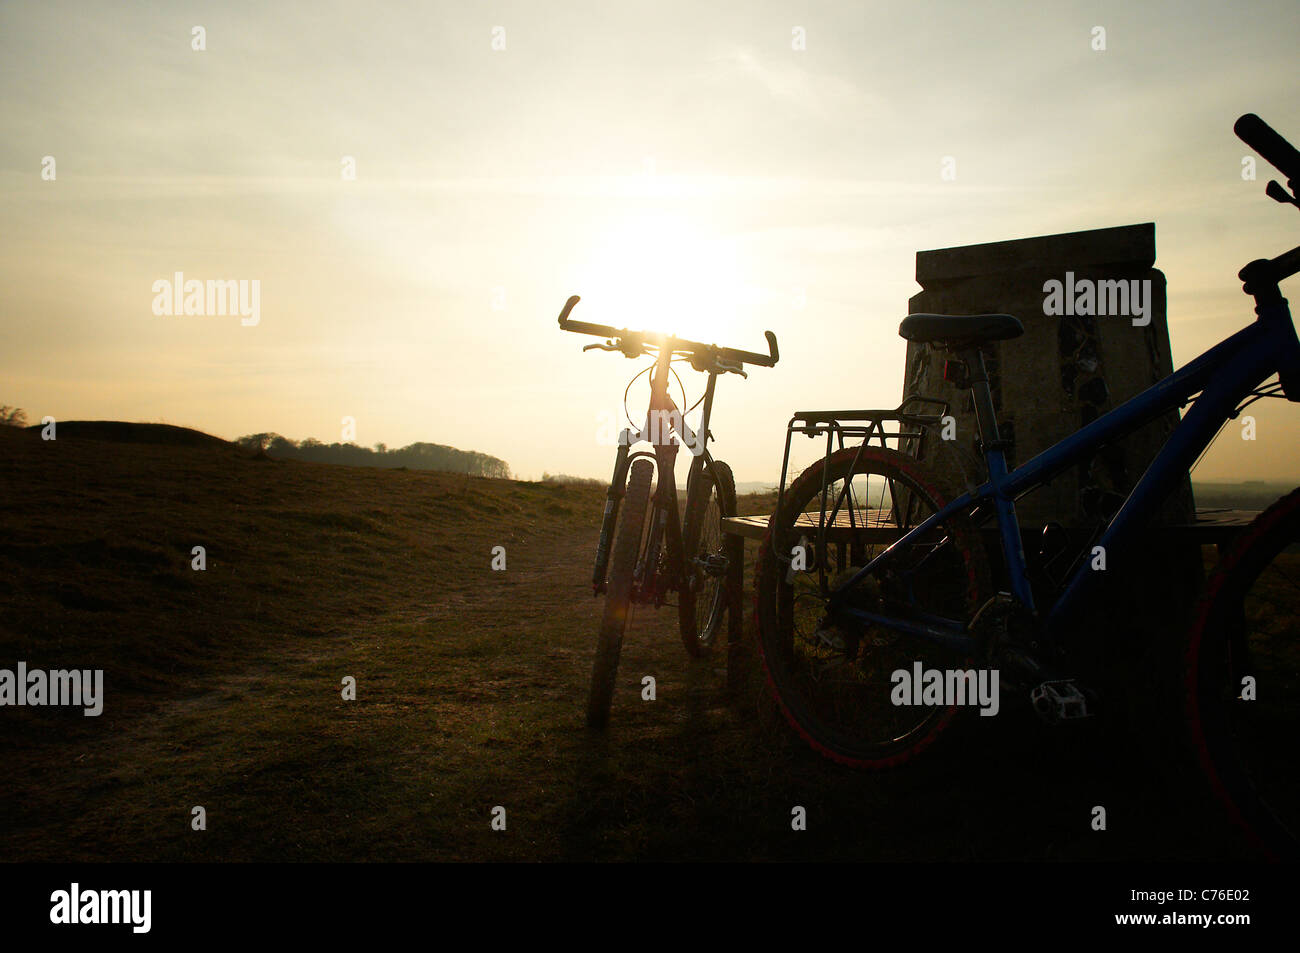 Mountain bikes in sunset in the hills Stock Photo